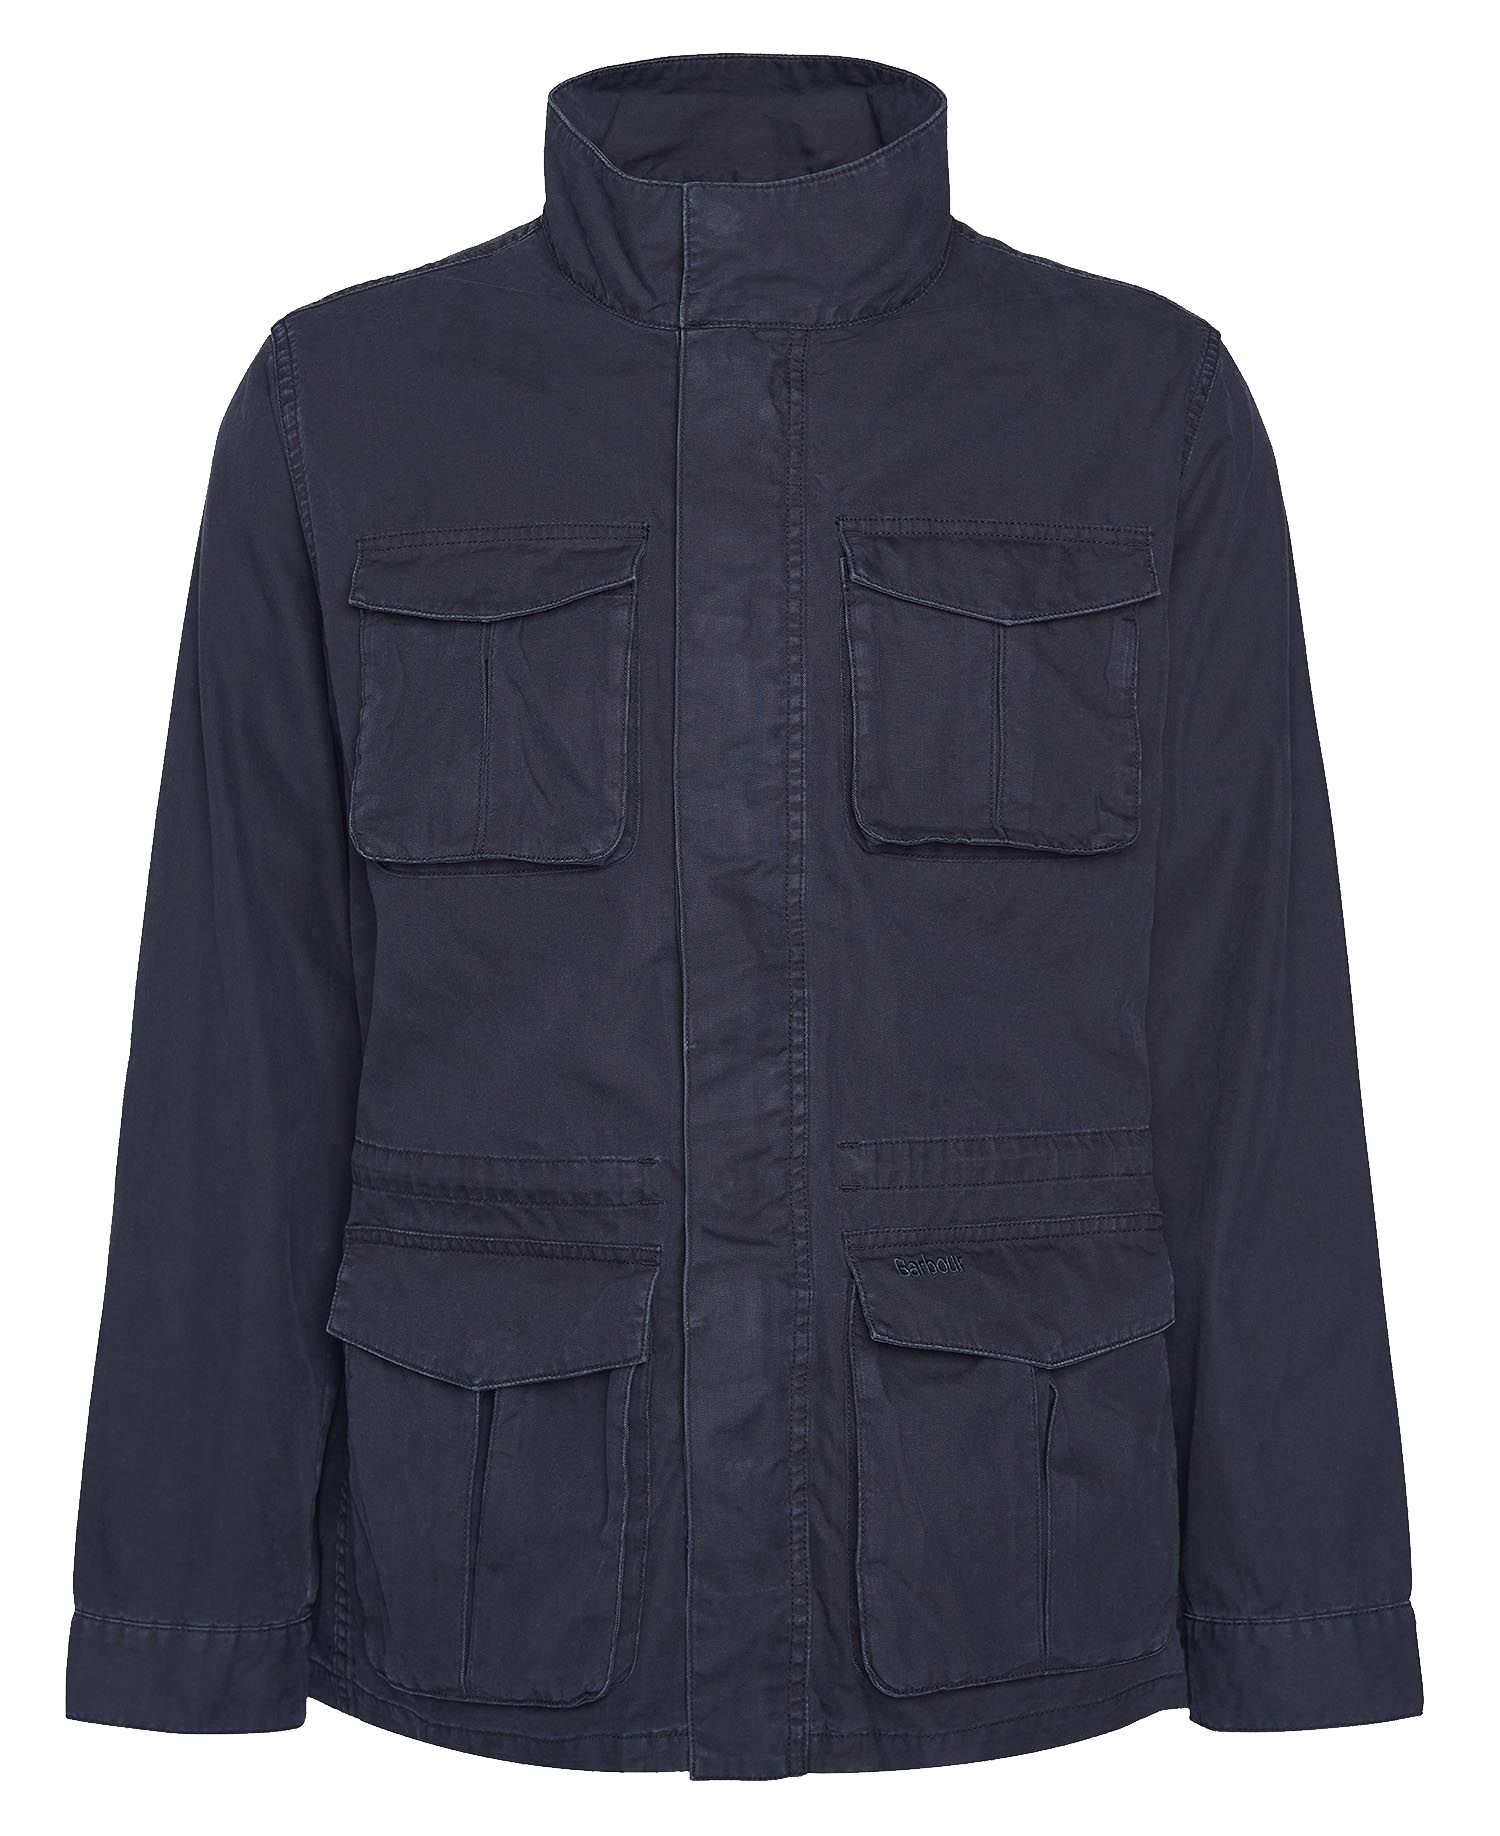 Barbour Barbour Belsfield Casual Jacket Midnight